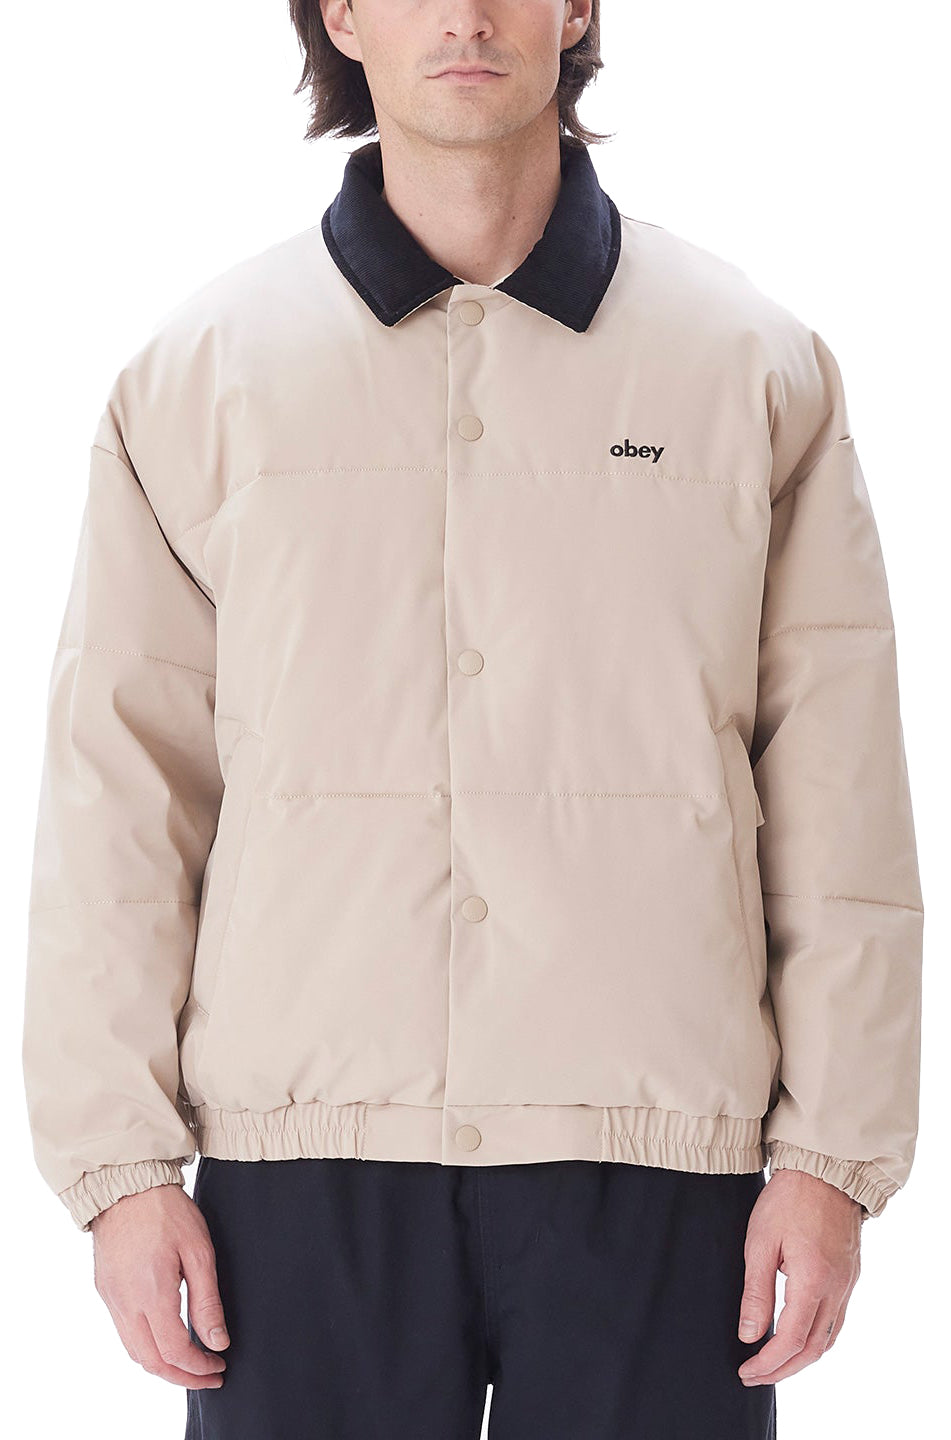  Obey Giacca Whispers Jacket Feather Grey Multi Beige Uomo - 3